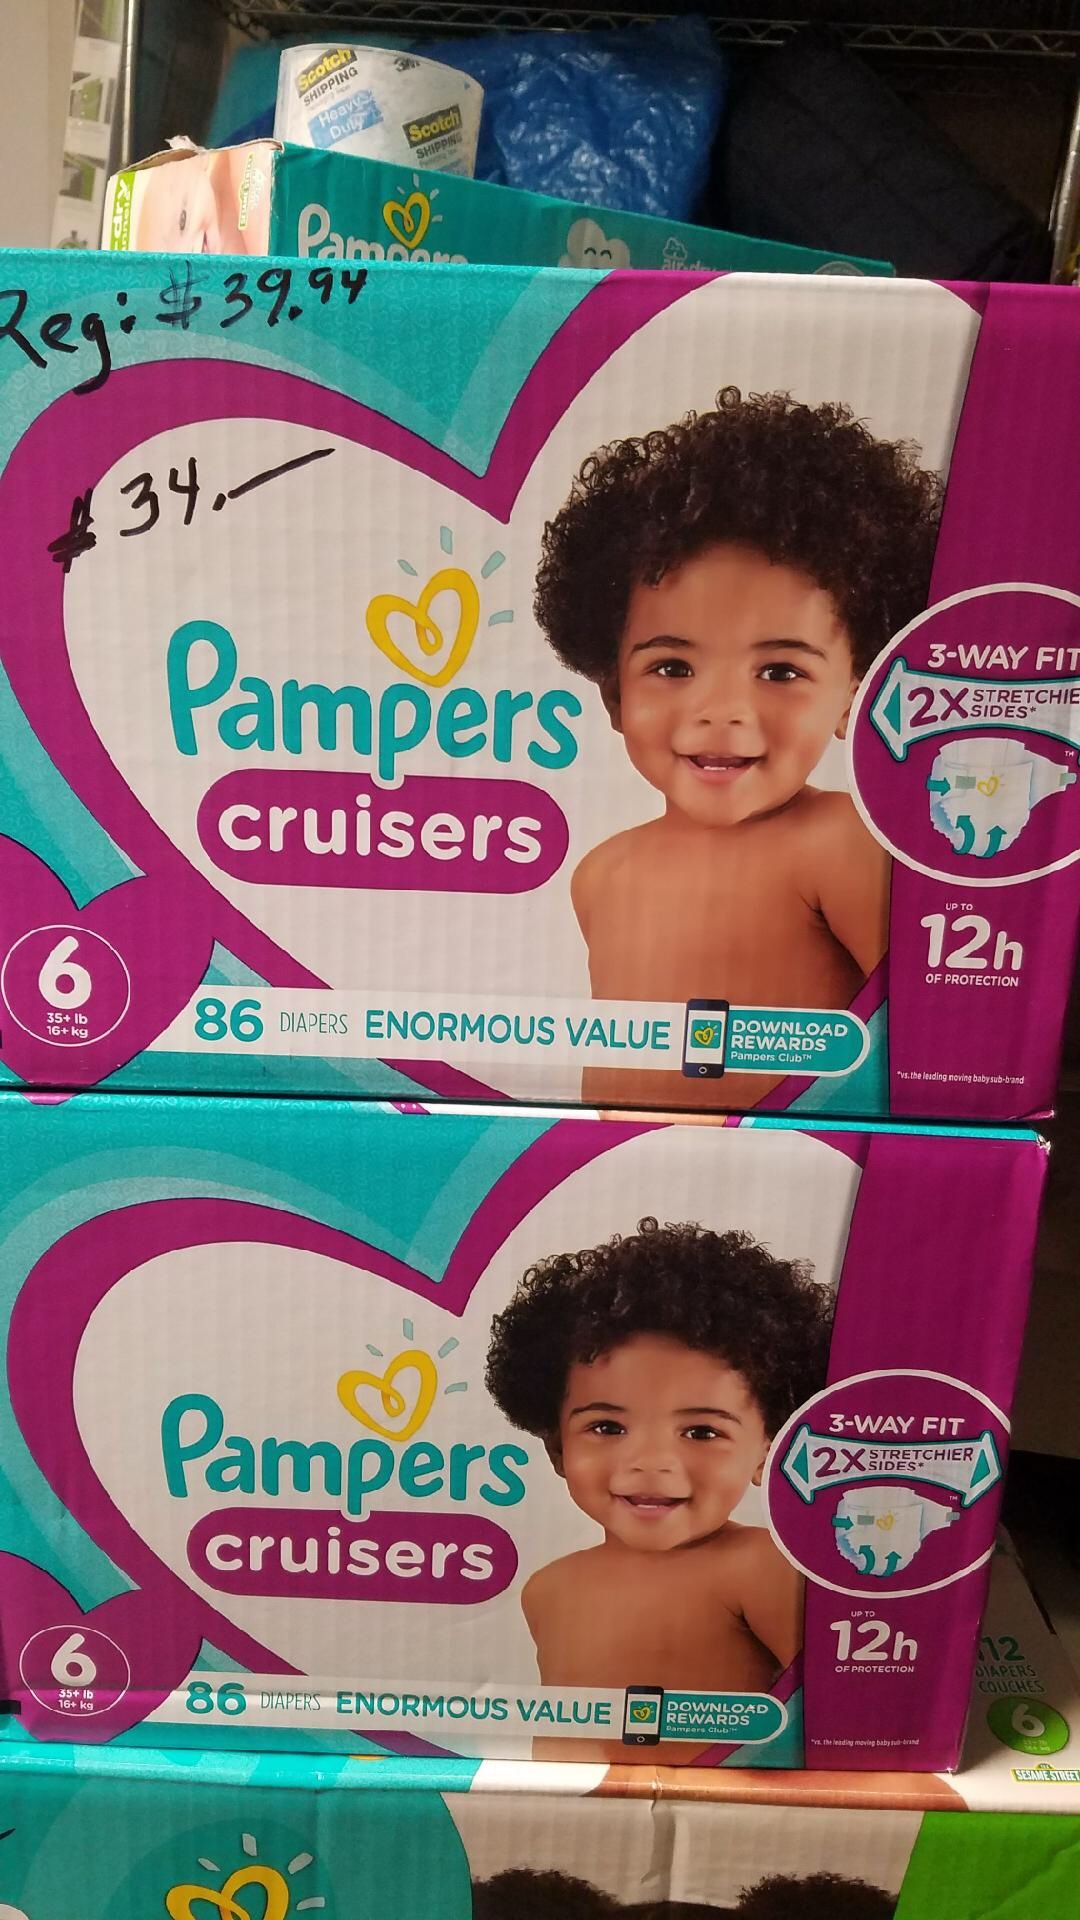 Pampers cruisers